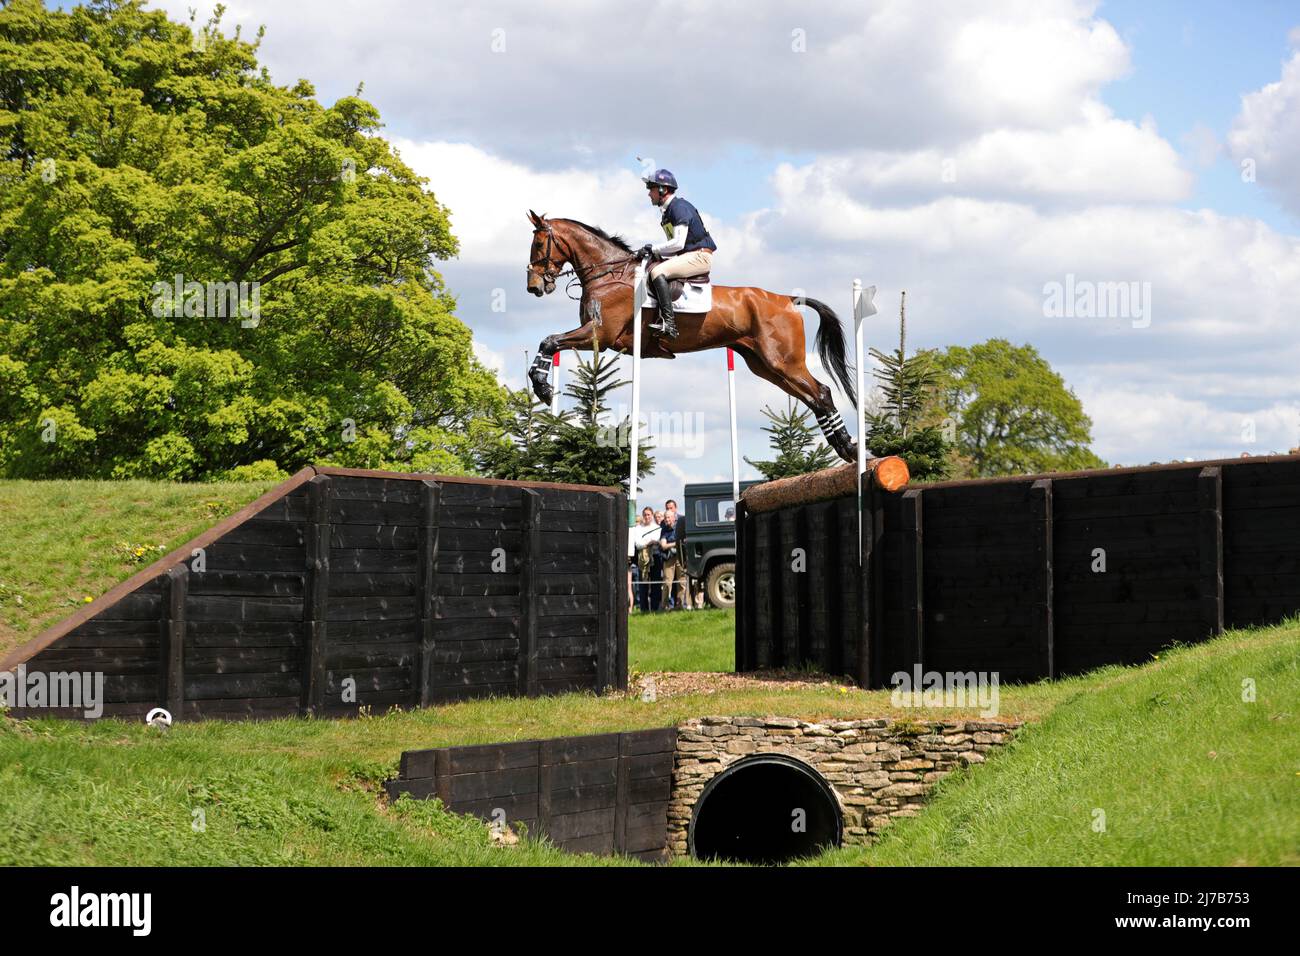 BADMINTON, UK, MAY 7TH James Rushbrooke riding Michem Eclipse during the Cross Country Event at Badminton Horse Trials, Badminton House, Badminton on Saturday 7th May 2022